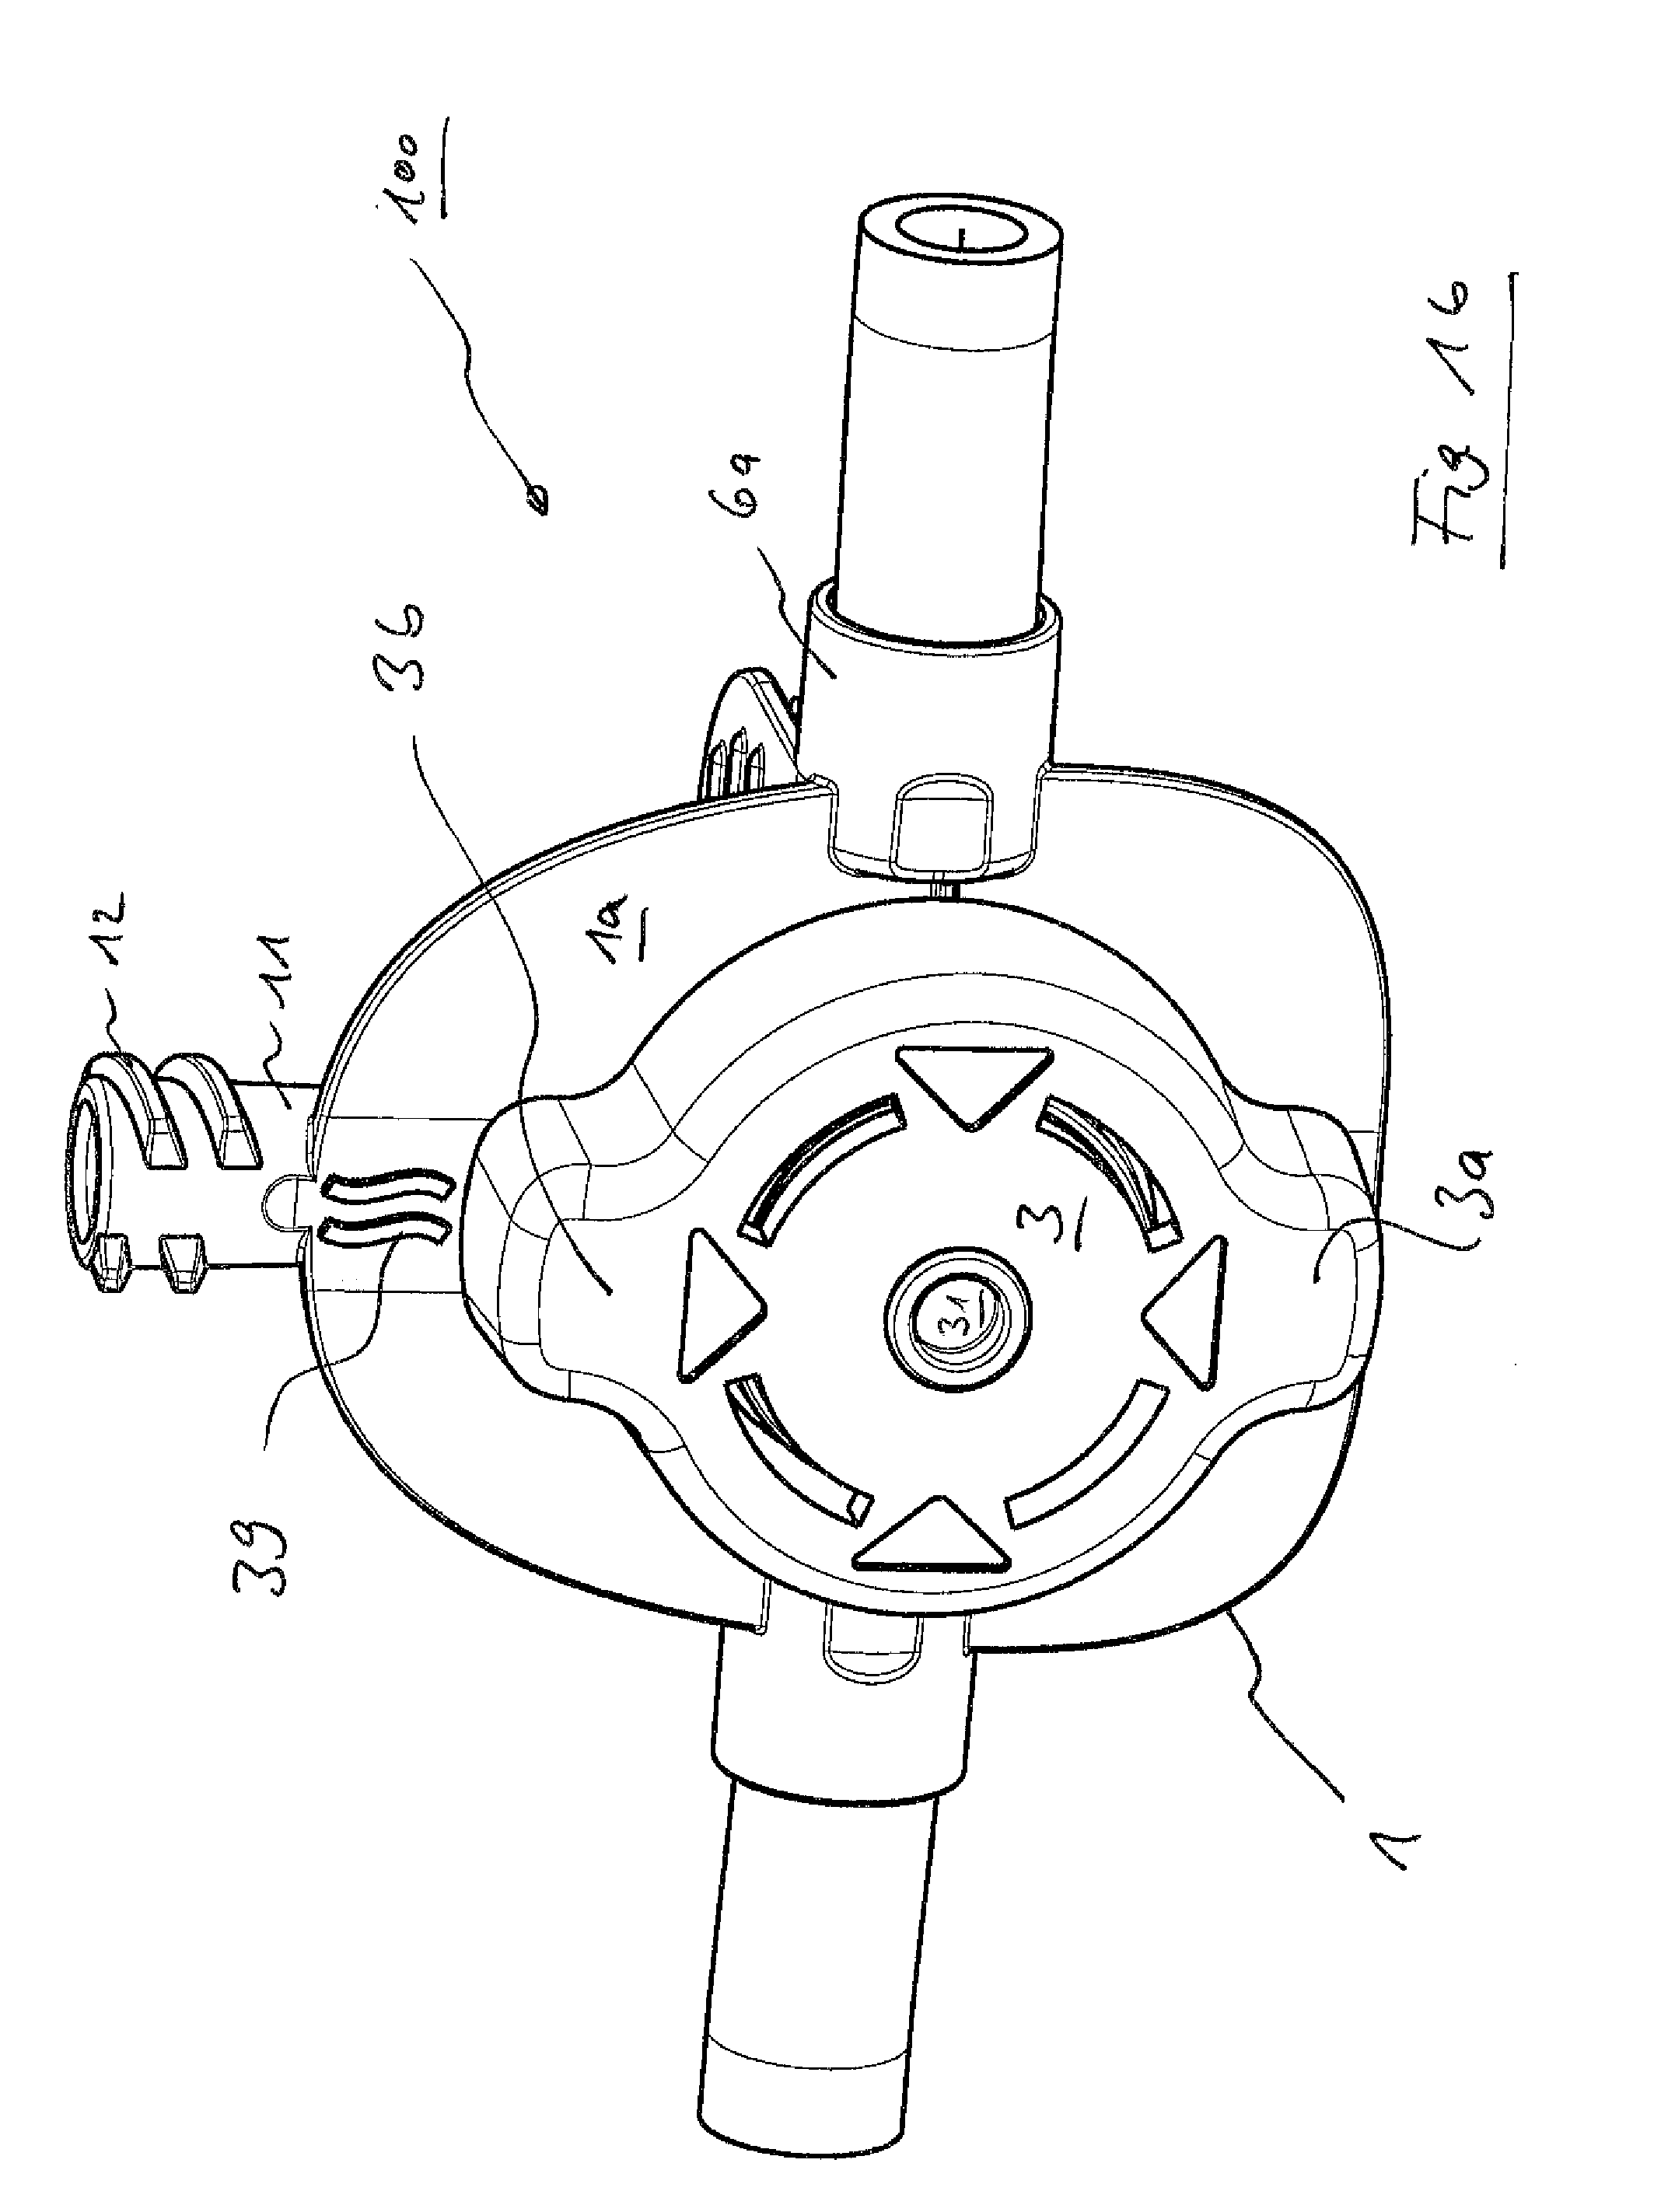 Medical port, blood hose for use in an extracorporeal blood treatment as well as medical treatment appratus